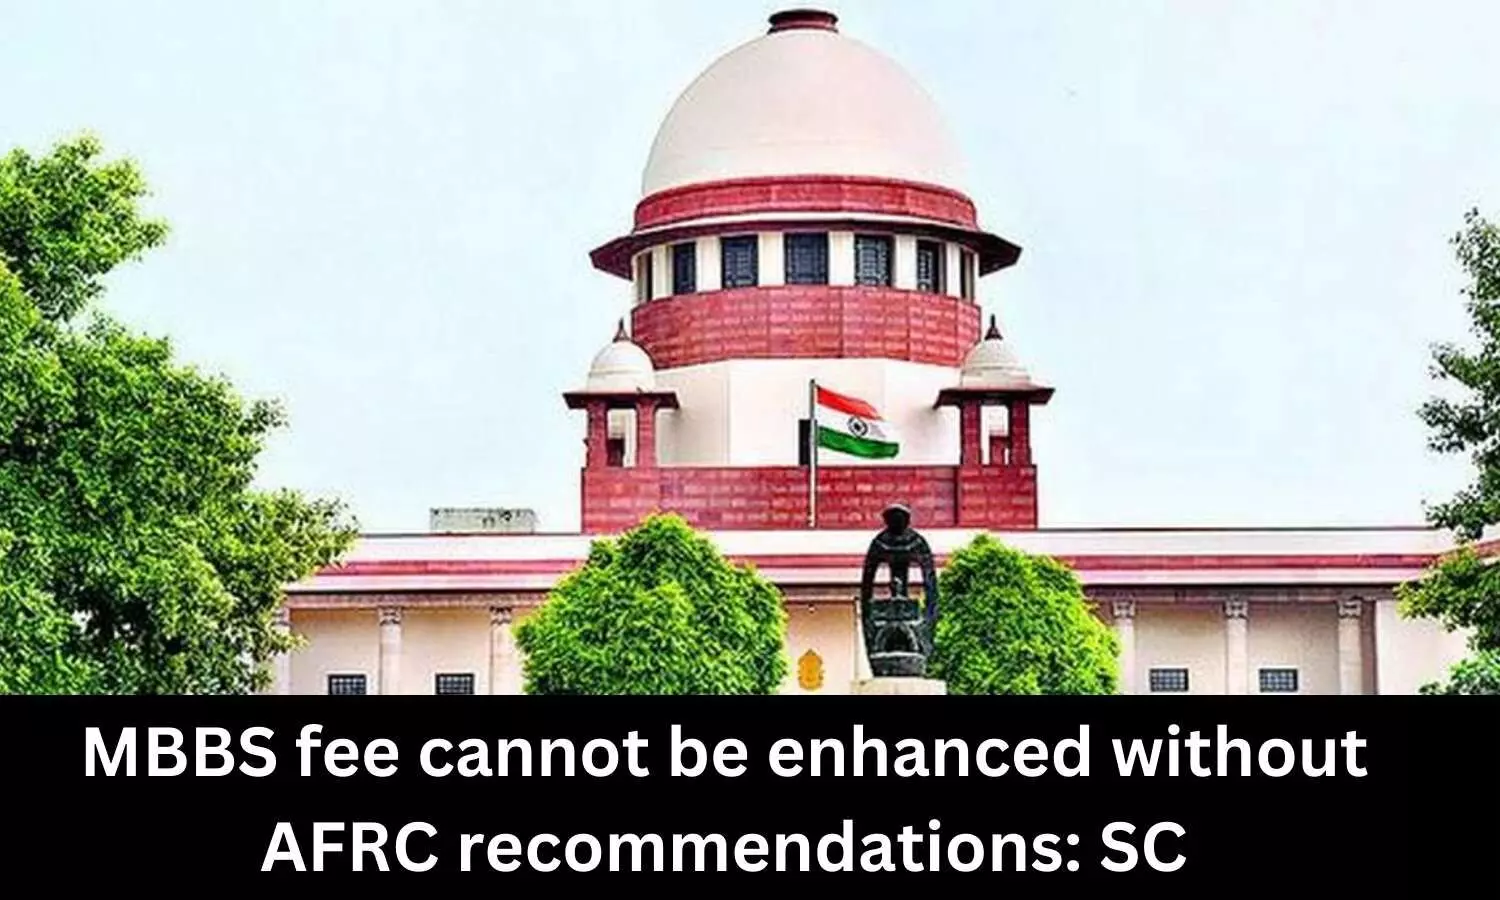 MBBS fee cannot be enhanced without AFRC recommendations: SC